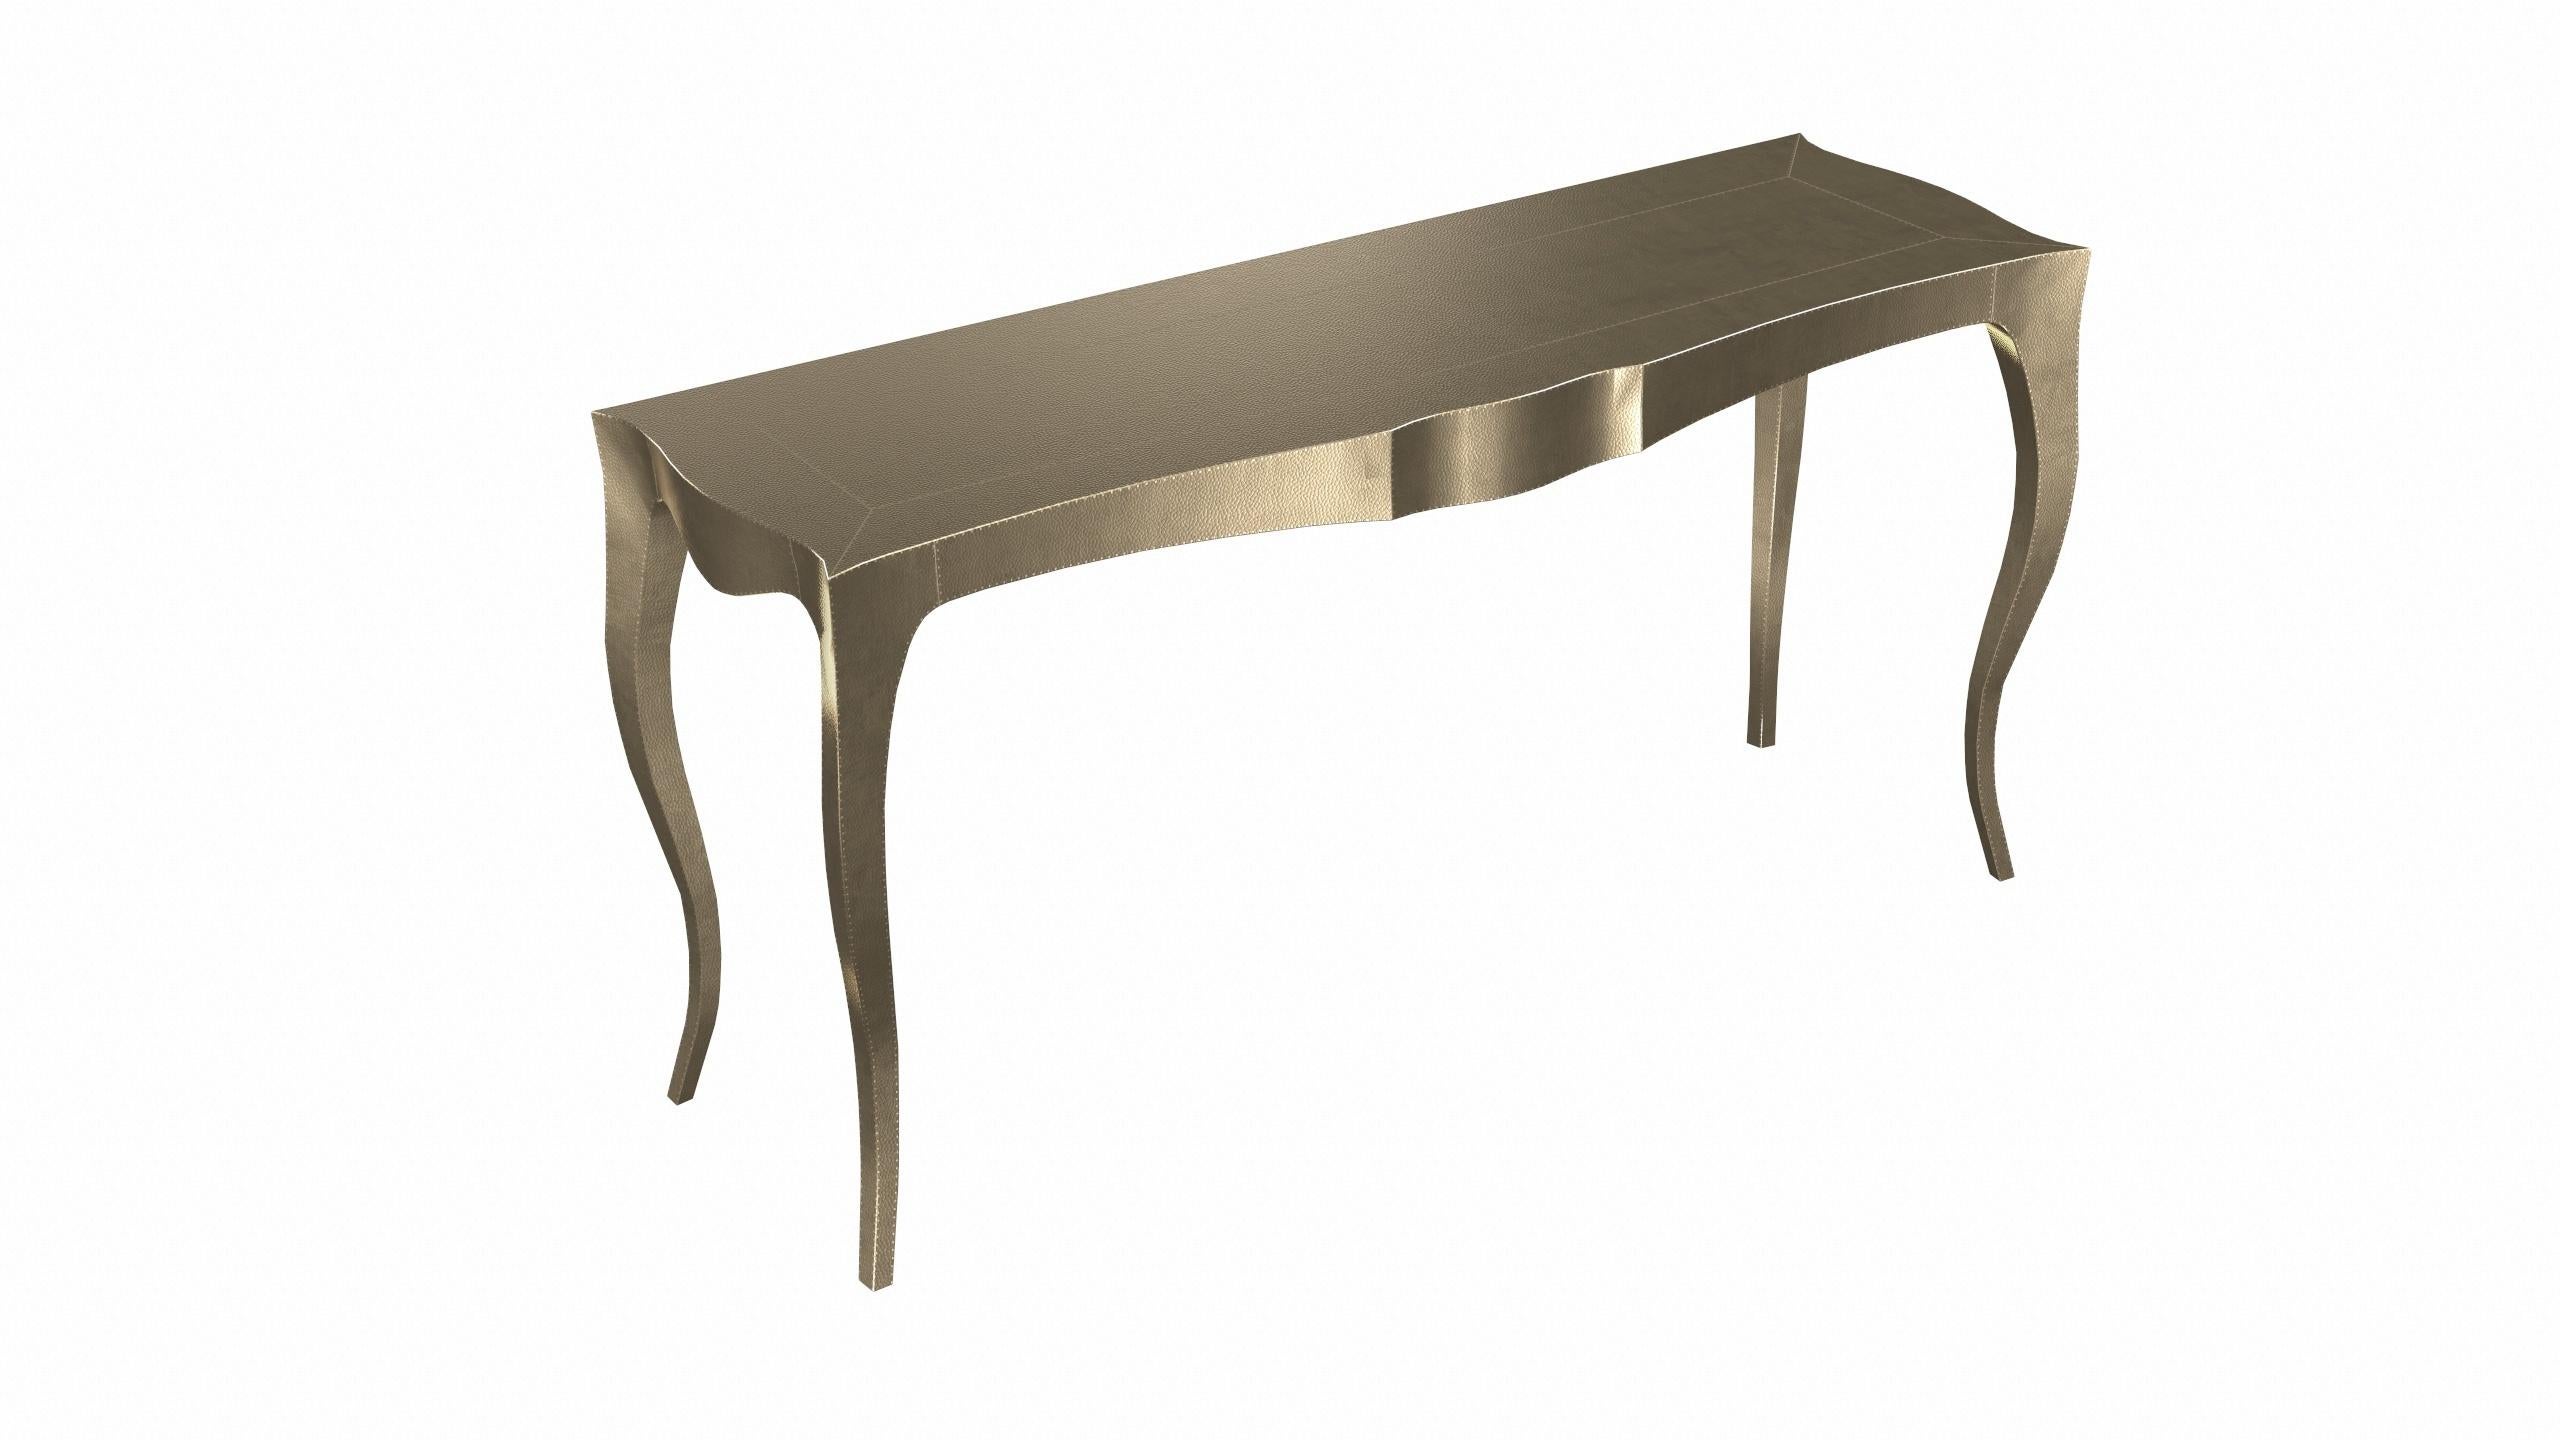 Other Louise Console Art Nouveau Tray Tables Mid. Hammered Brass by Paul Mathieu For Sale